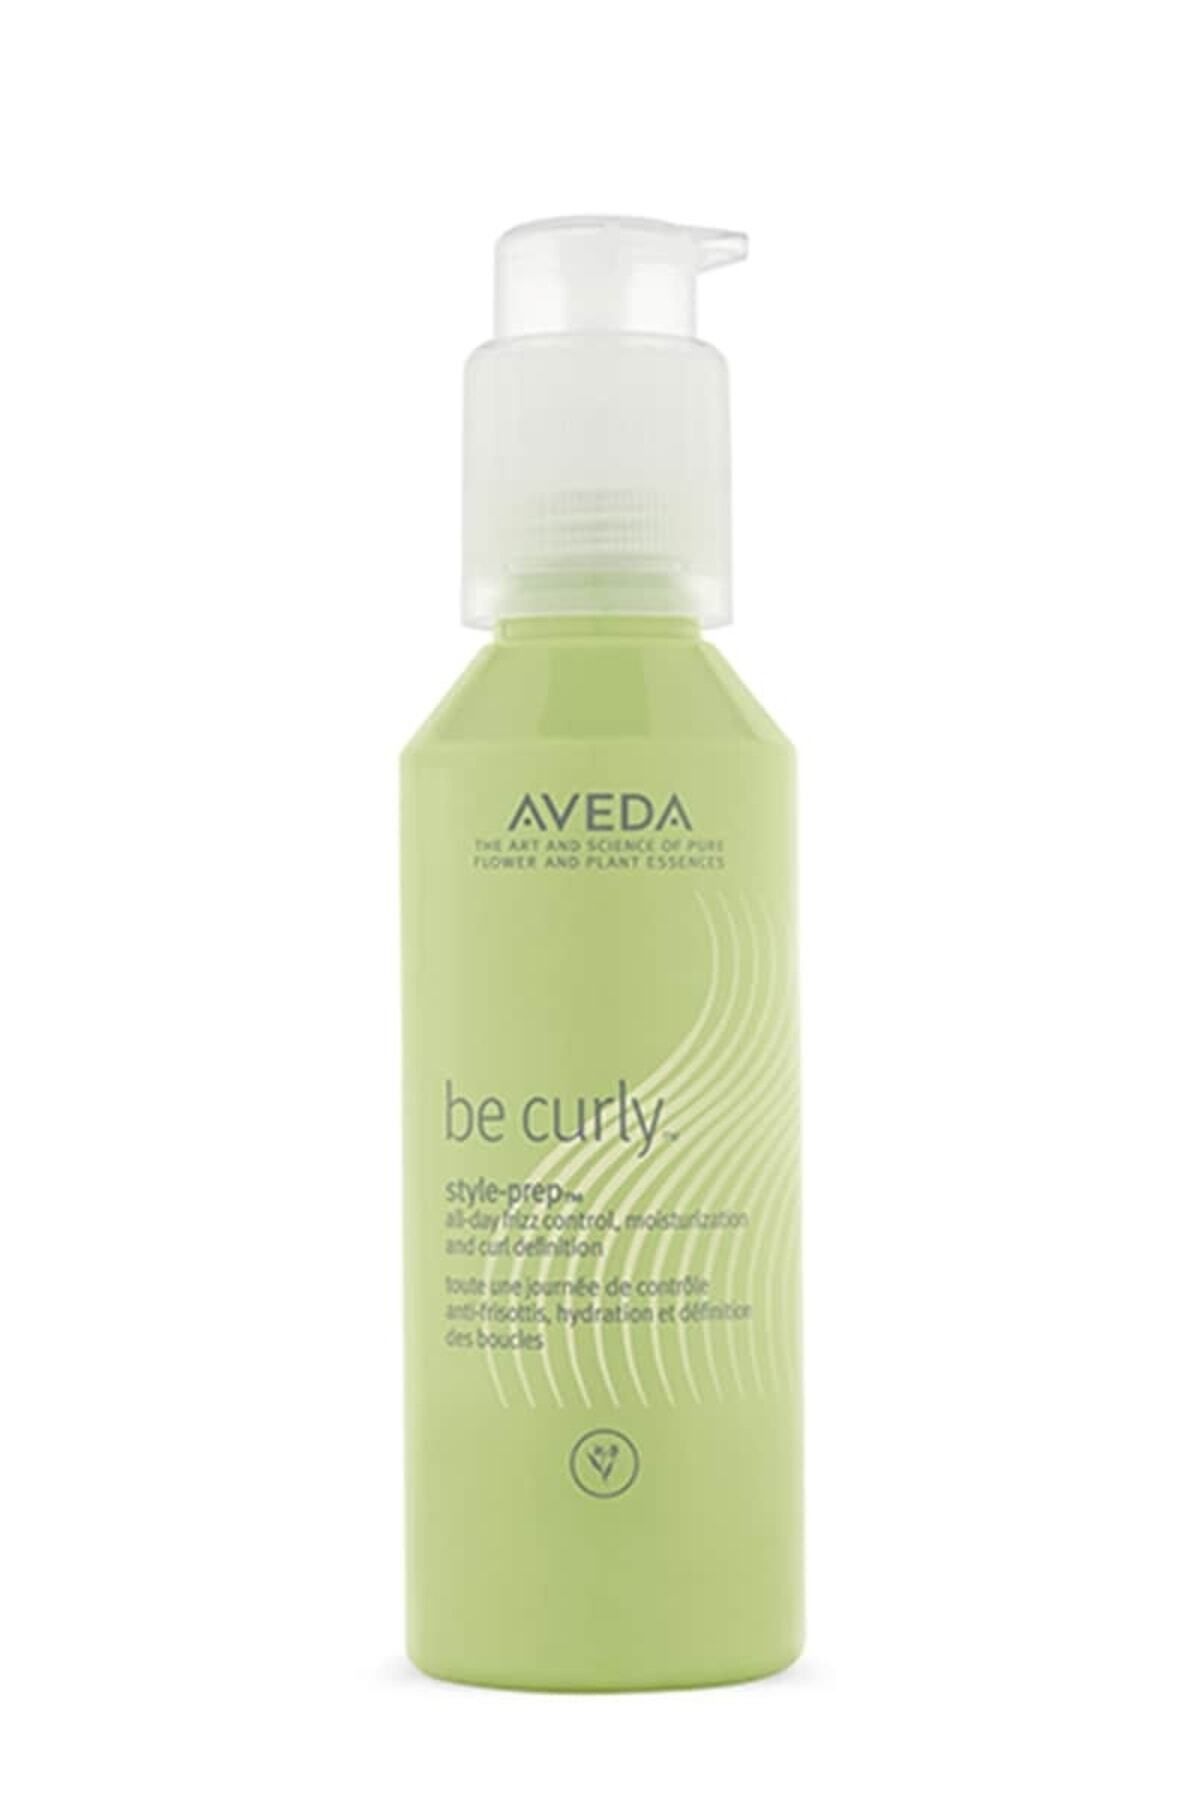 Aveda Smooth Hair -Be Curly Pre-styling Care for Curly Hair 100ml PSSN966